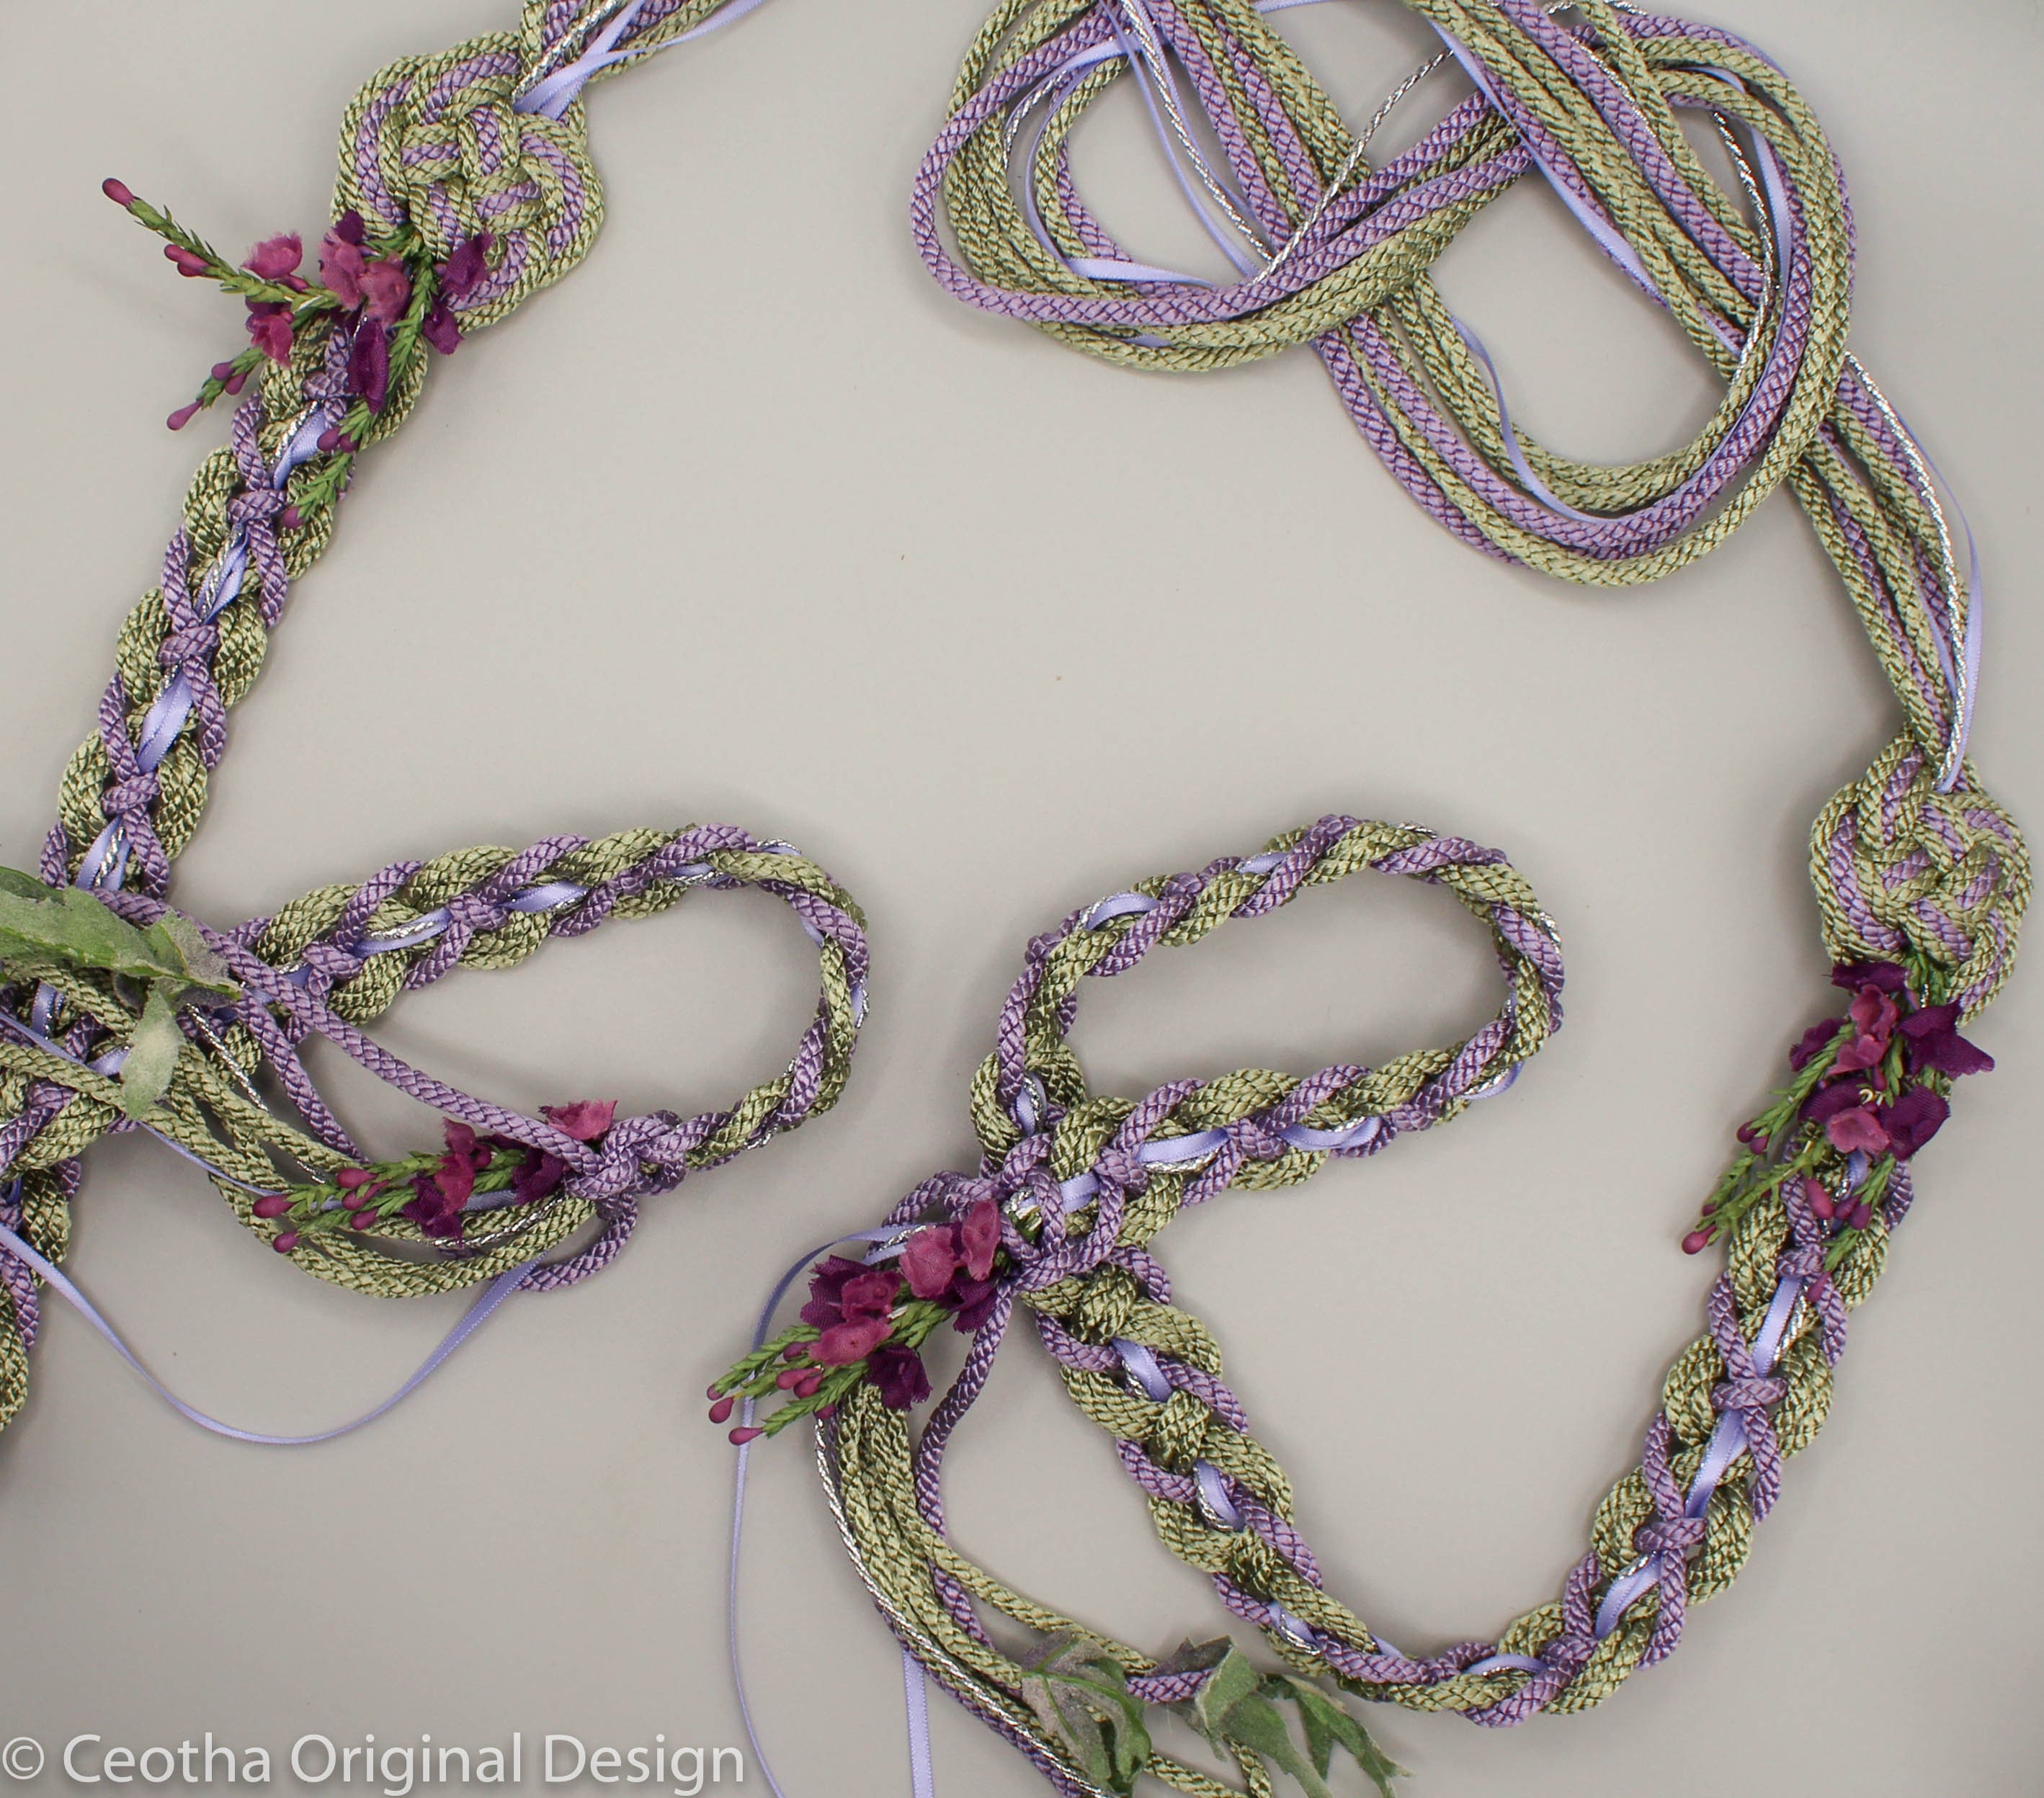 Handfasting Cord Tie Your Own Infinity Knot Bloom Heather Lavender Sage  Purple Customisable Handfast Wedding Cord 